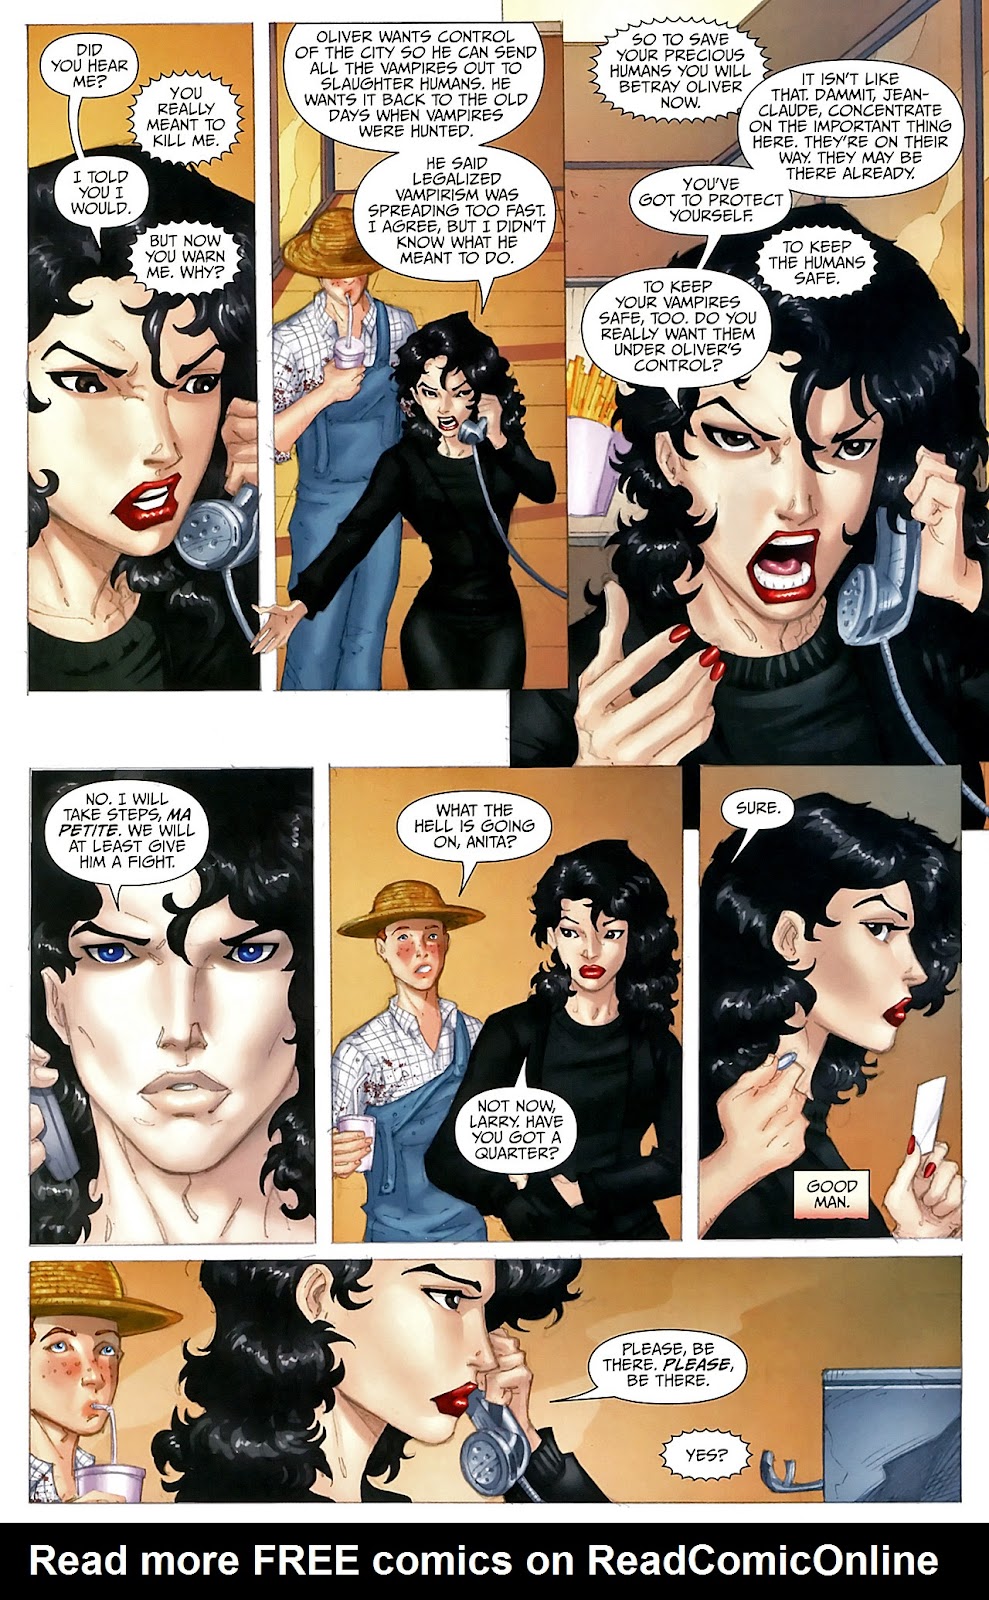 Anita Blake, Vampire Hunter: Circus of the Damned - The Scoundrel issue 4 - Page 6